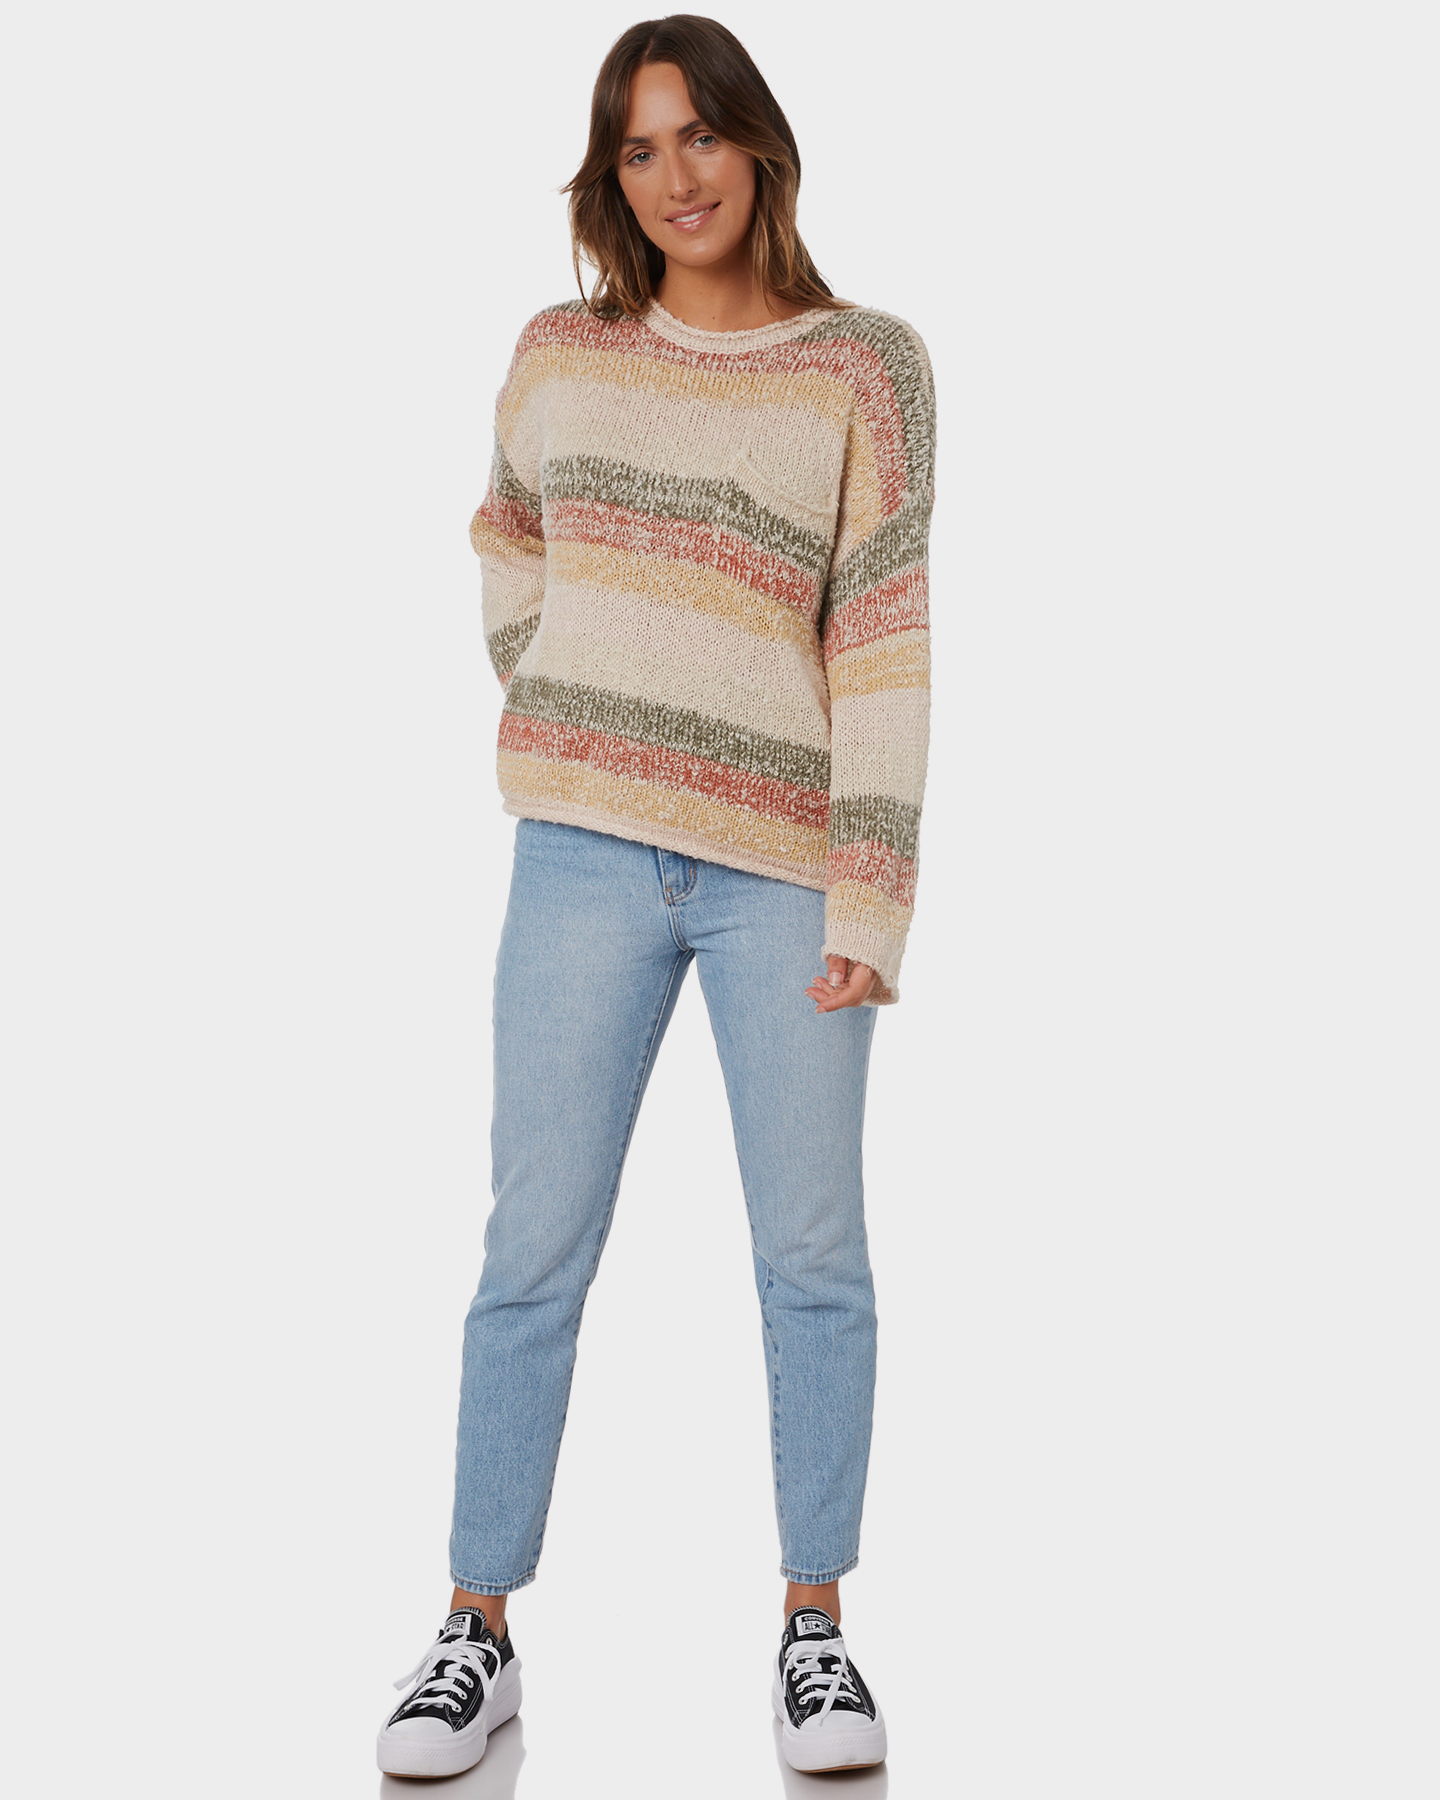 Rip Curl North Shore Sweater - Off White | SurfStitch